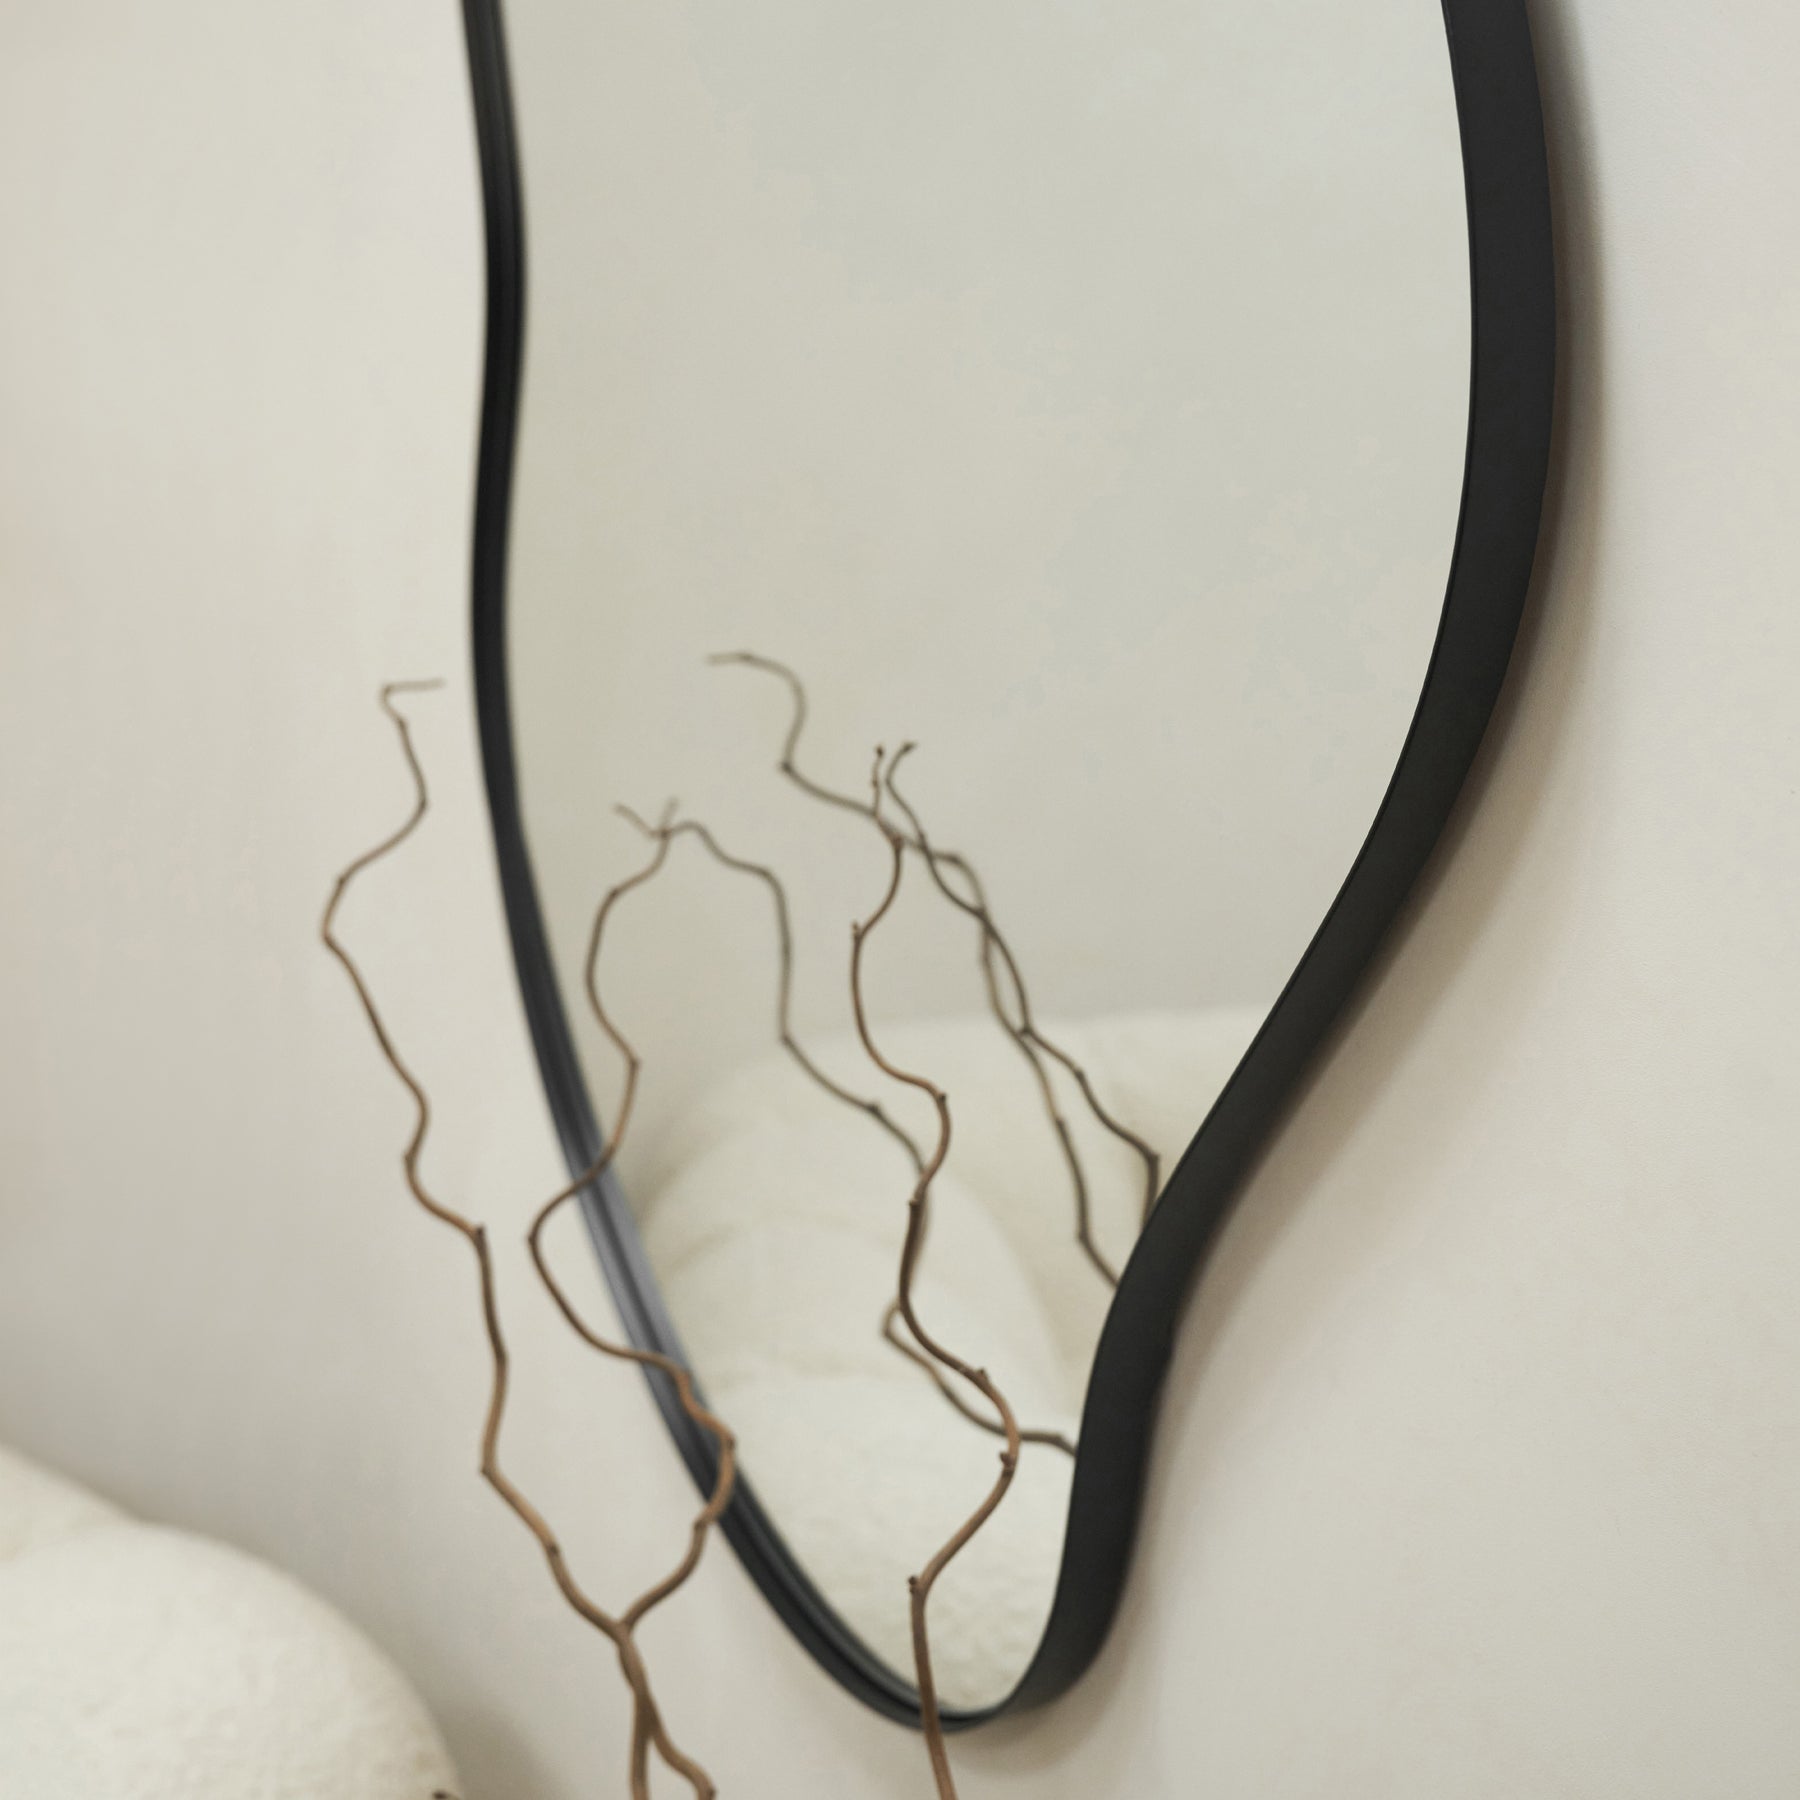 Black Metal Pond Shaped Irregular Wall Mirror on wall above branches